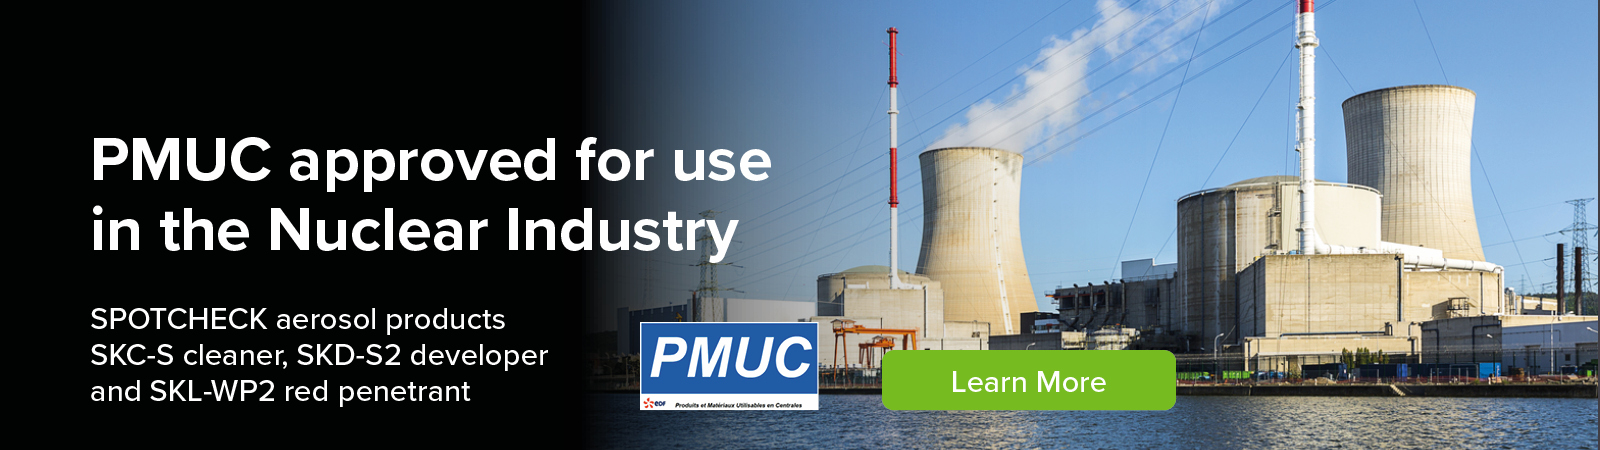 PMUC approved for use in the Nuclear Industry